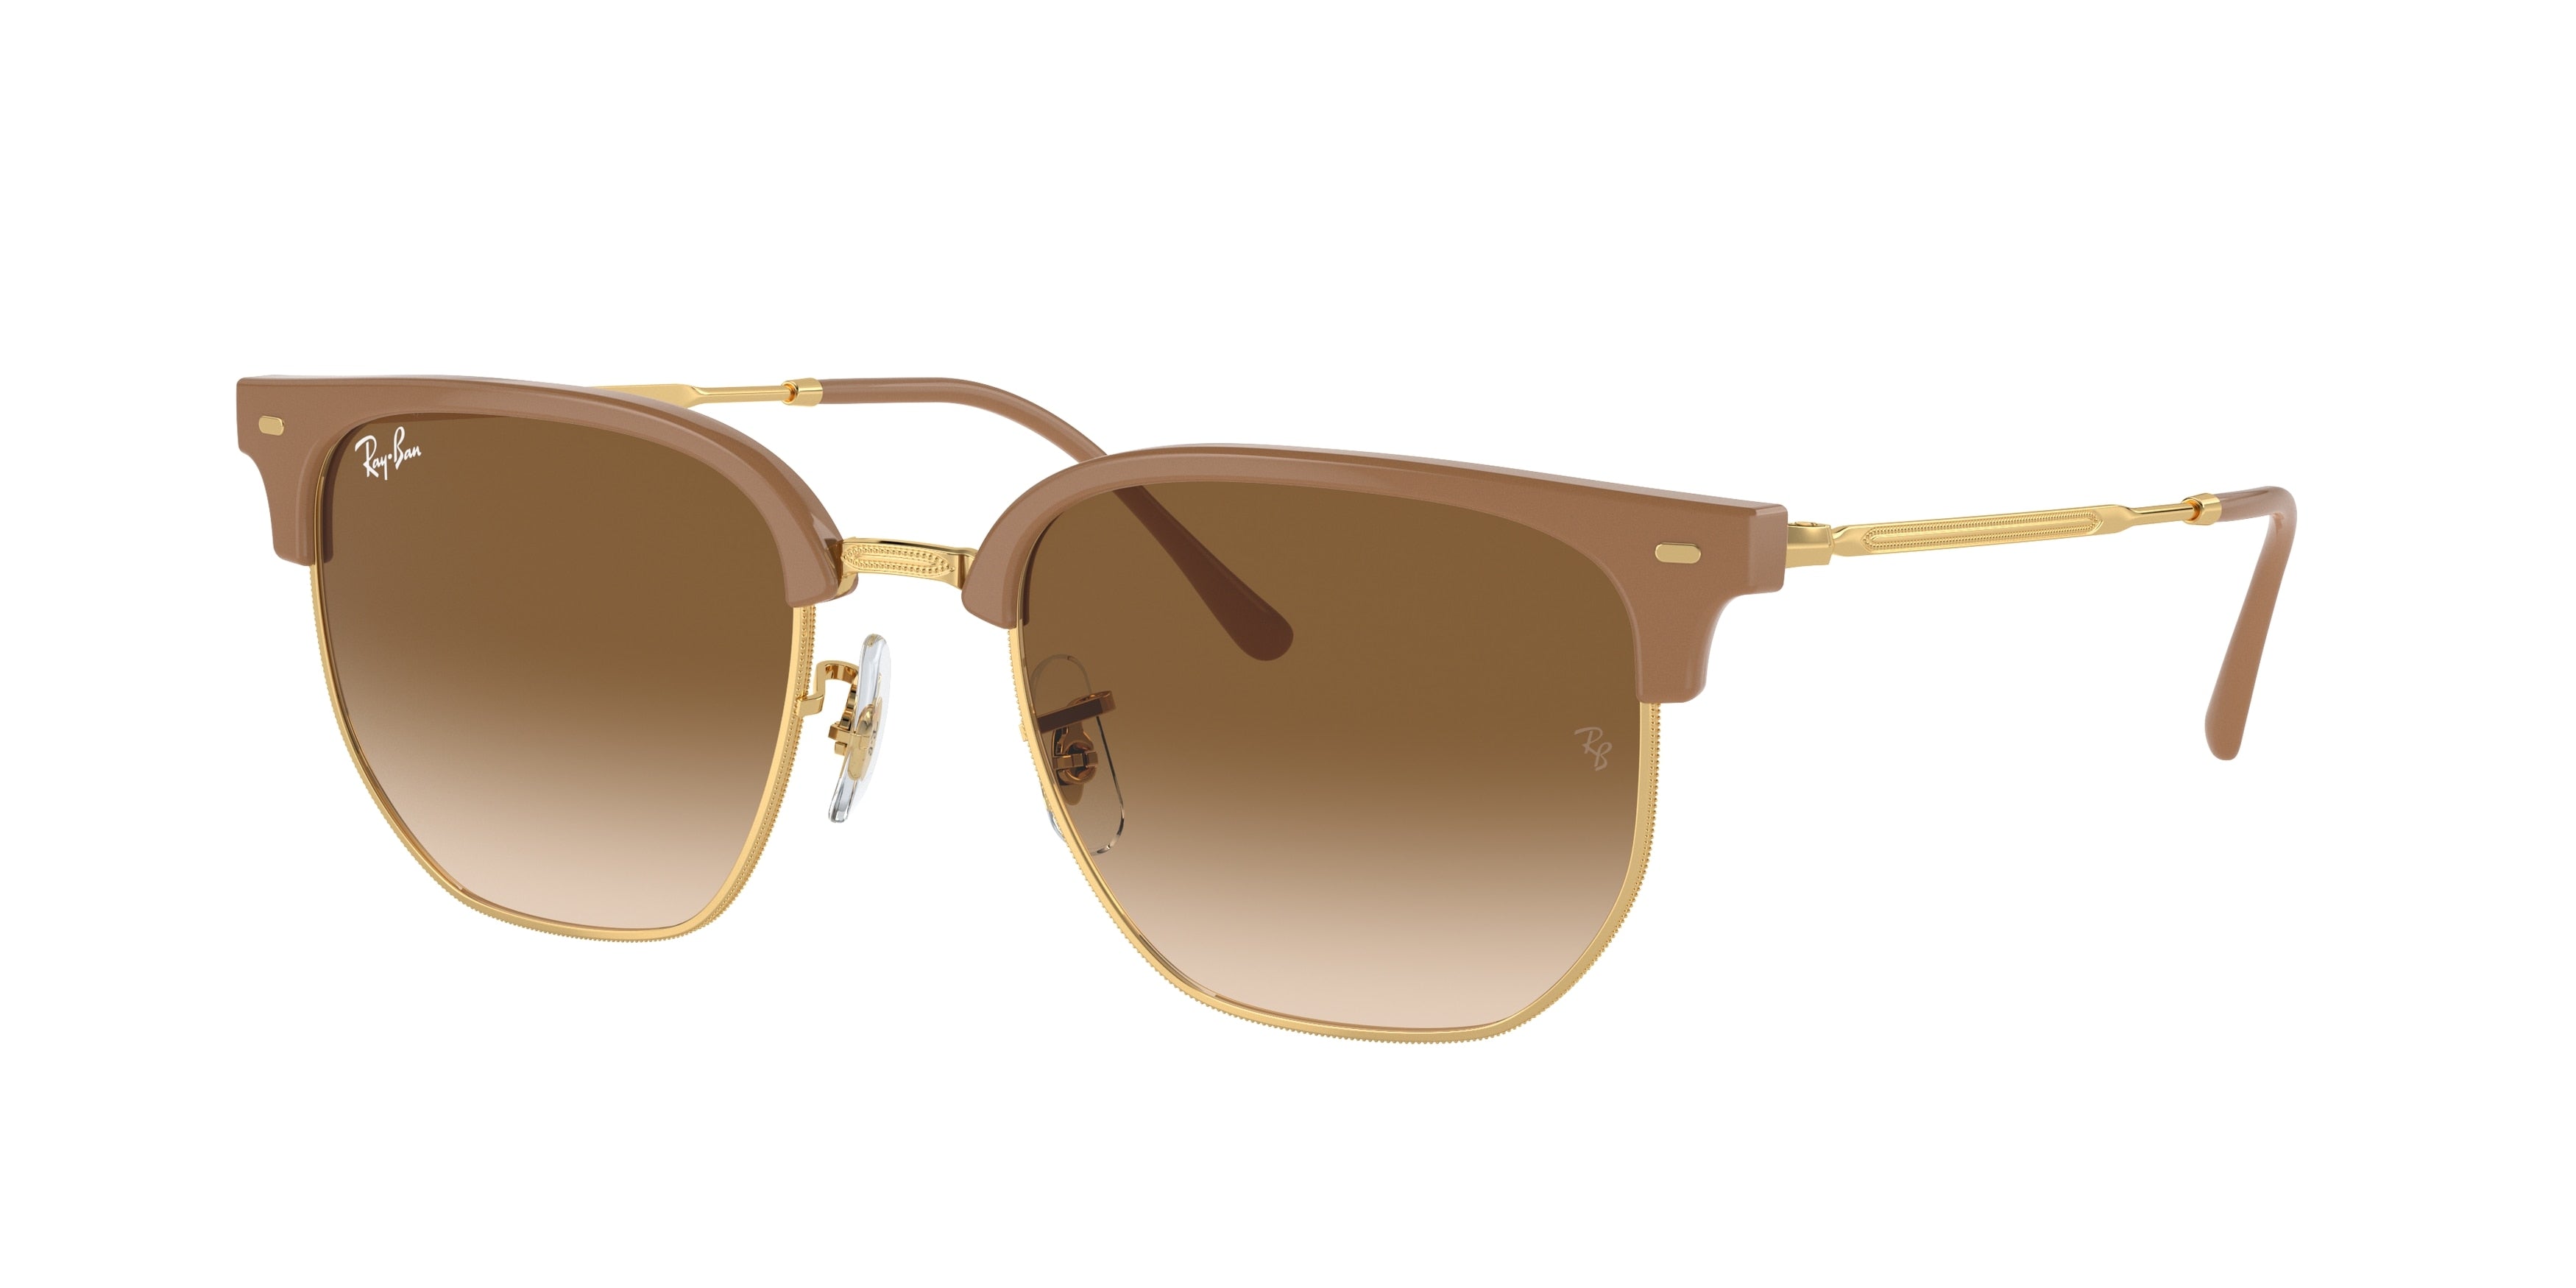 Ray-Ban NEW CLUBMASTER RB4416 Irregular Sunglasses  672151-Beige On Gold 53-145-20 - Color Map Beige